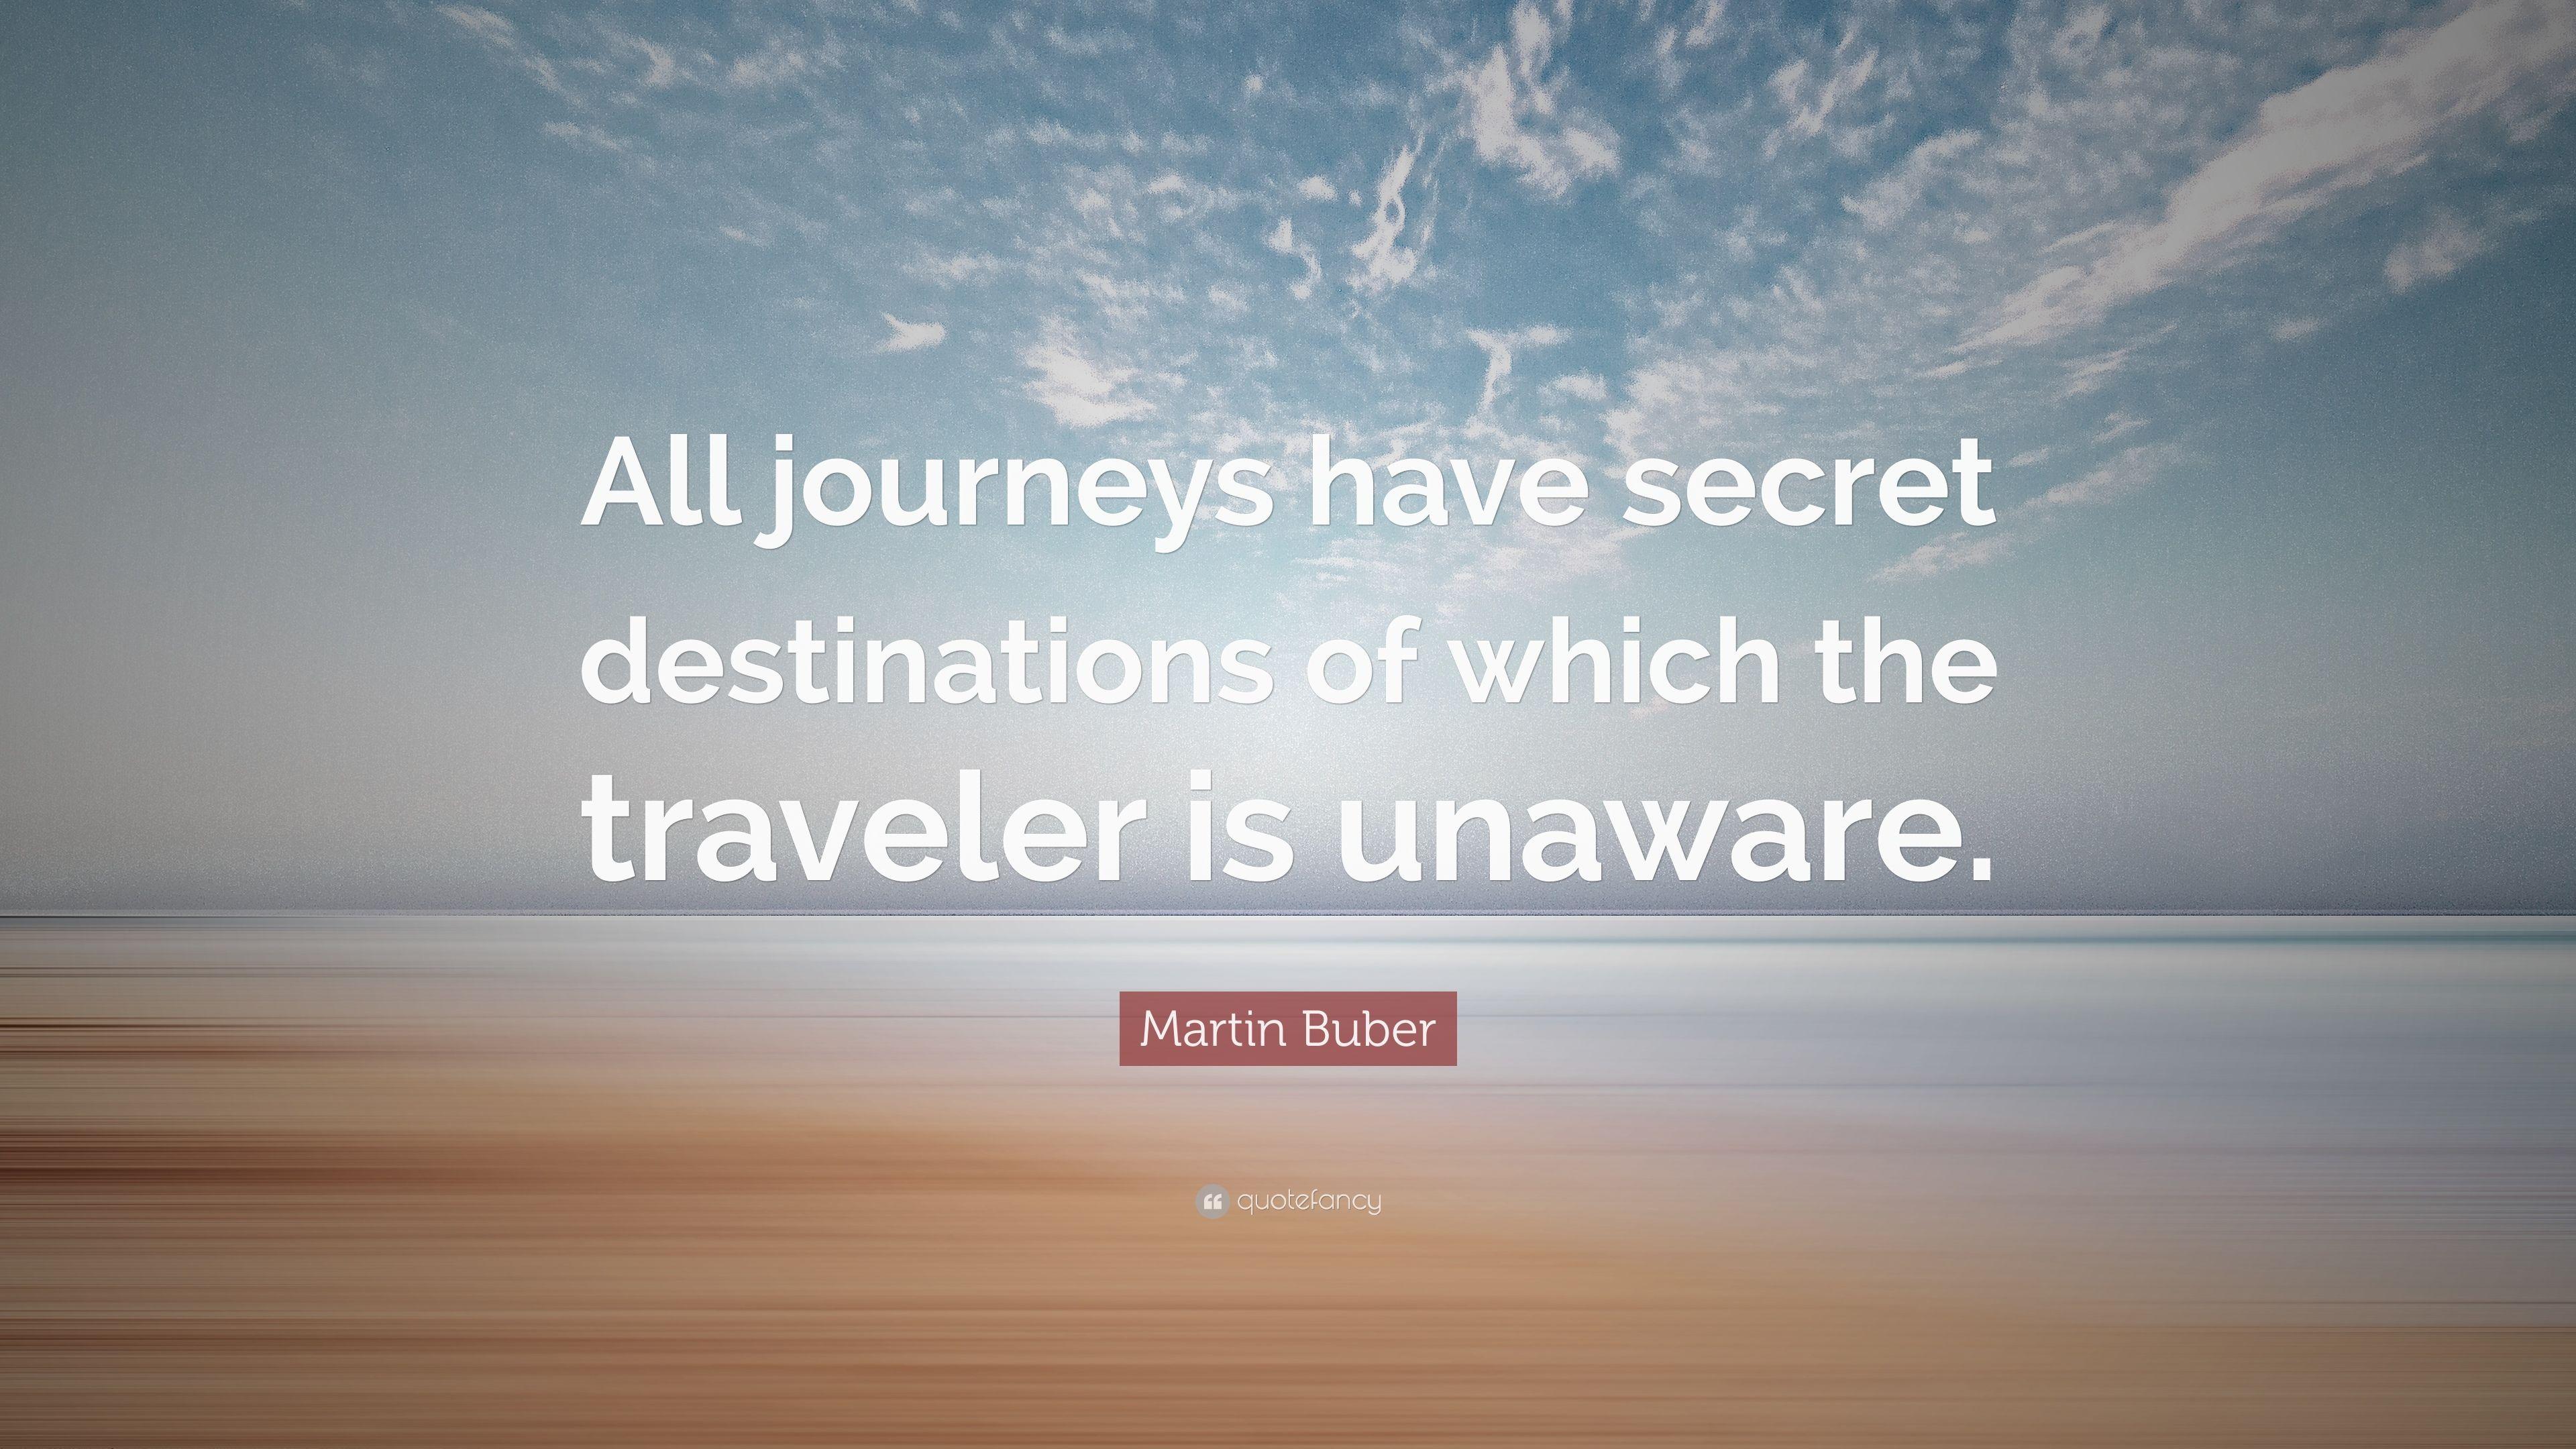 Martin Buber Quote: “All journeys have secret destinations of which